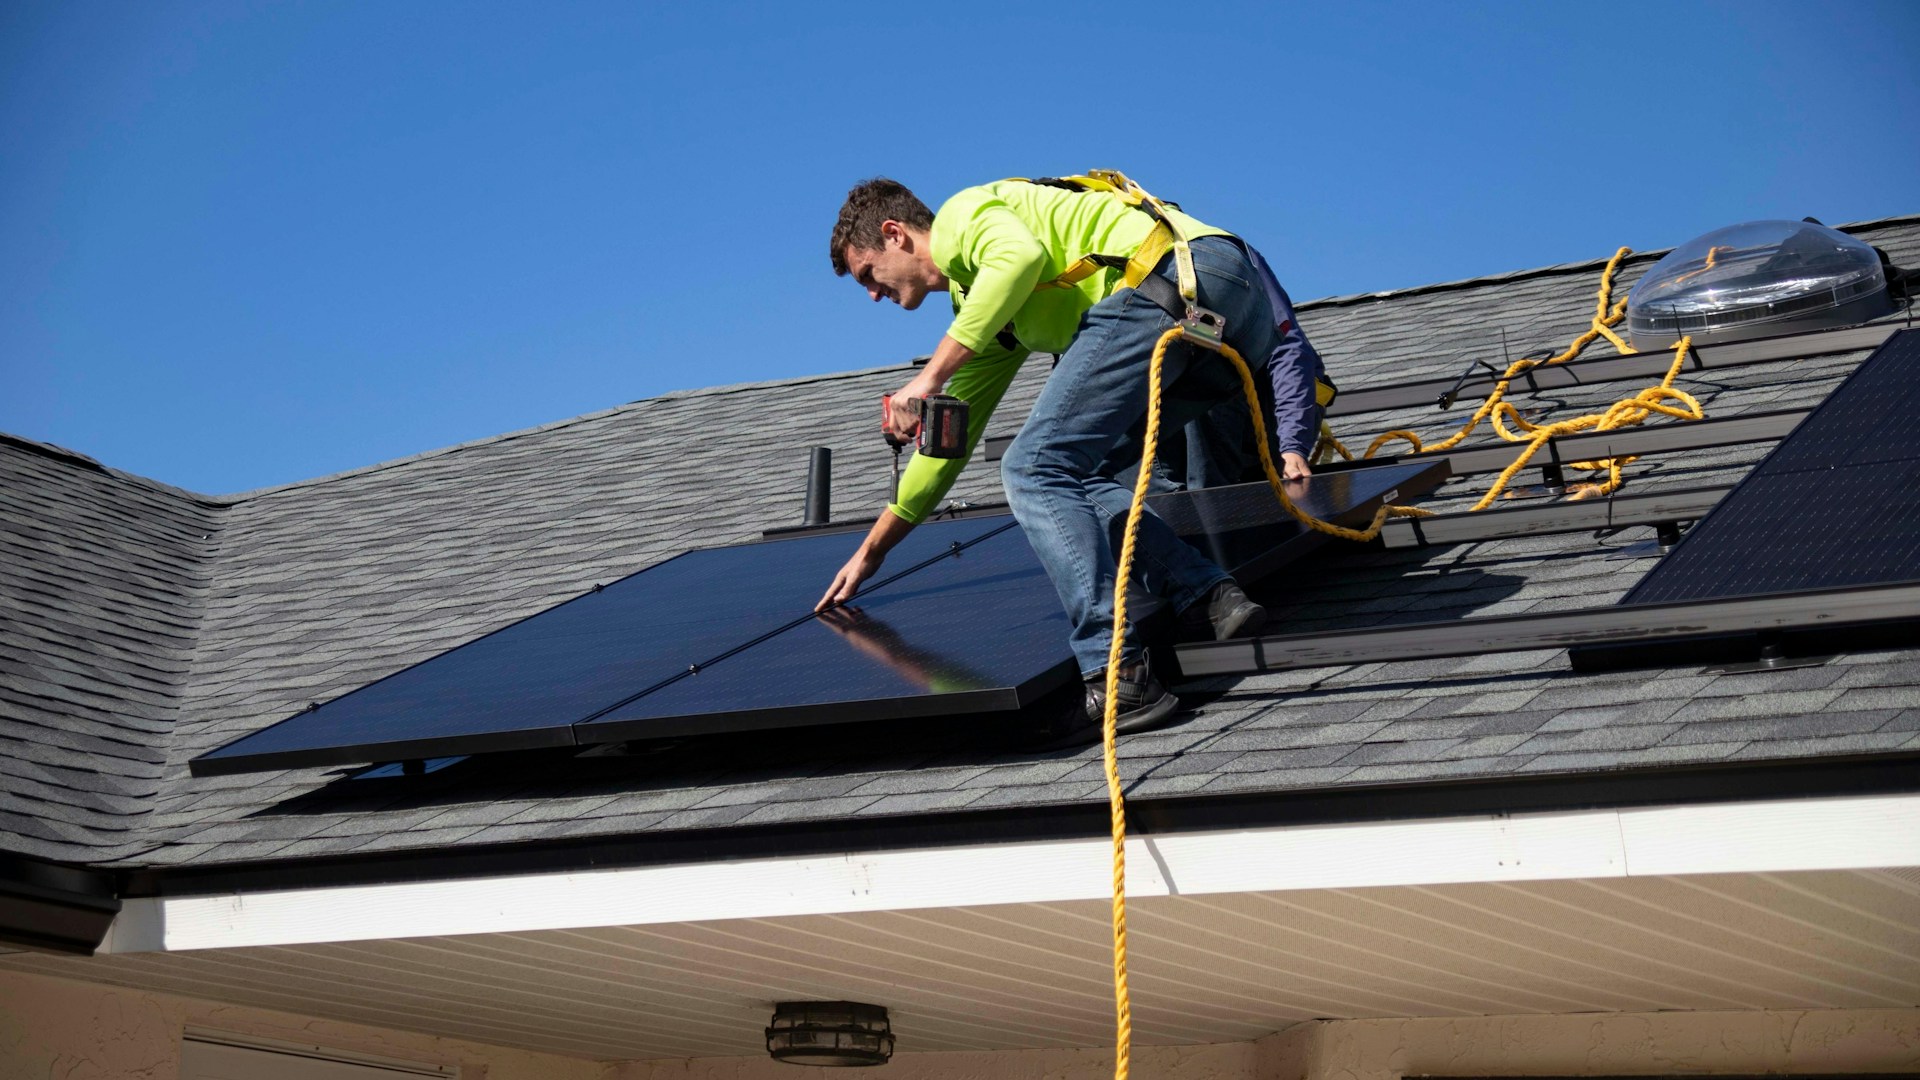 Solar panels being installed. Image by Unsplash